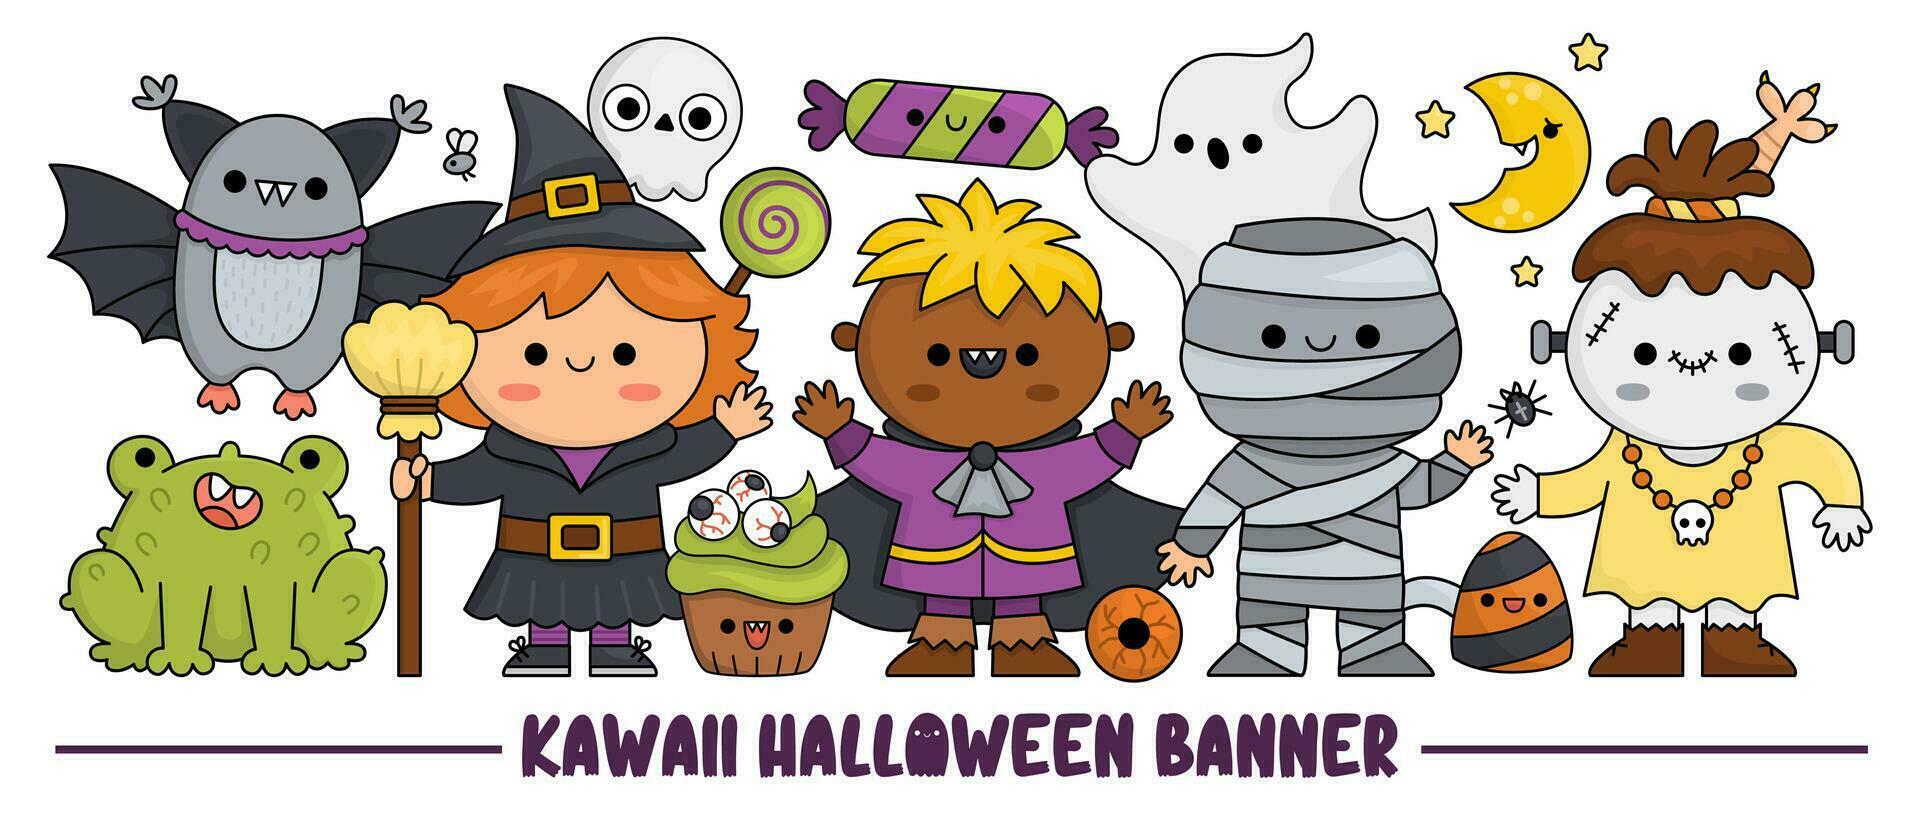 Halloween horizontal banner with cute kawaii characters for kids. Vector witch standing with vampire, mummy, bat, frog, ghost. Cute All saints day illustration. Funny trick or treat party set for kids